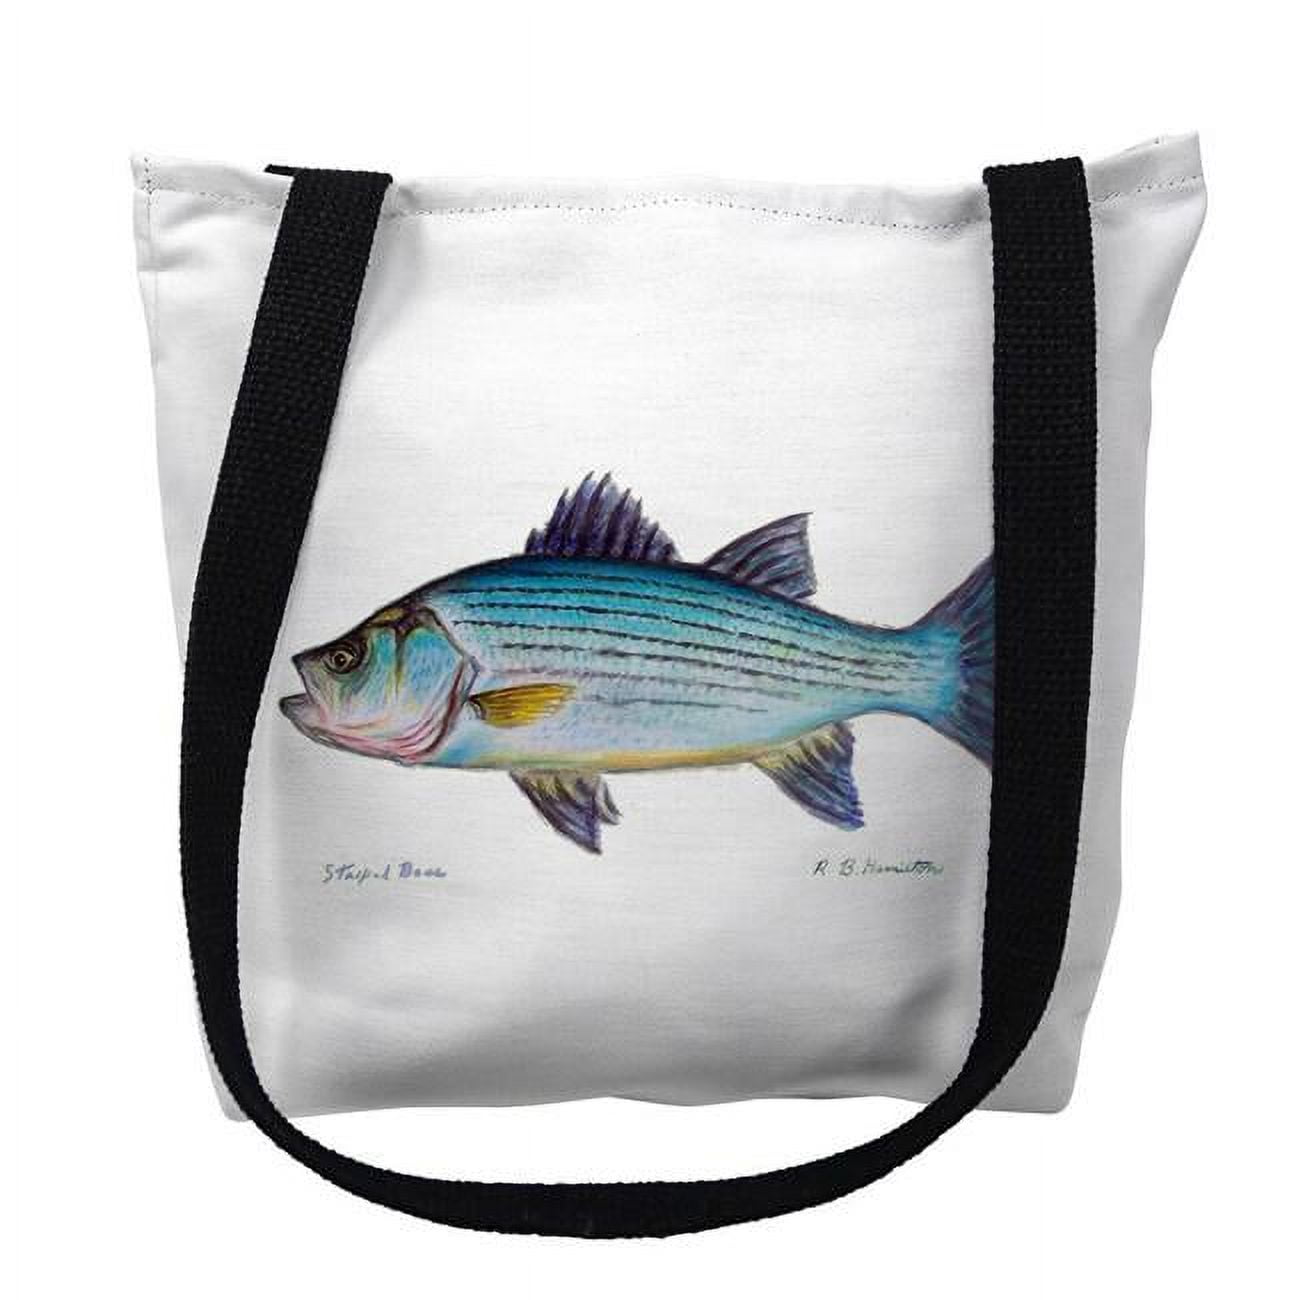 Ty002am 16 X 16 In. Striped Bass On White Tote Bag - Medium